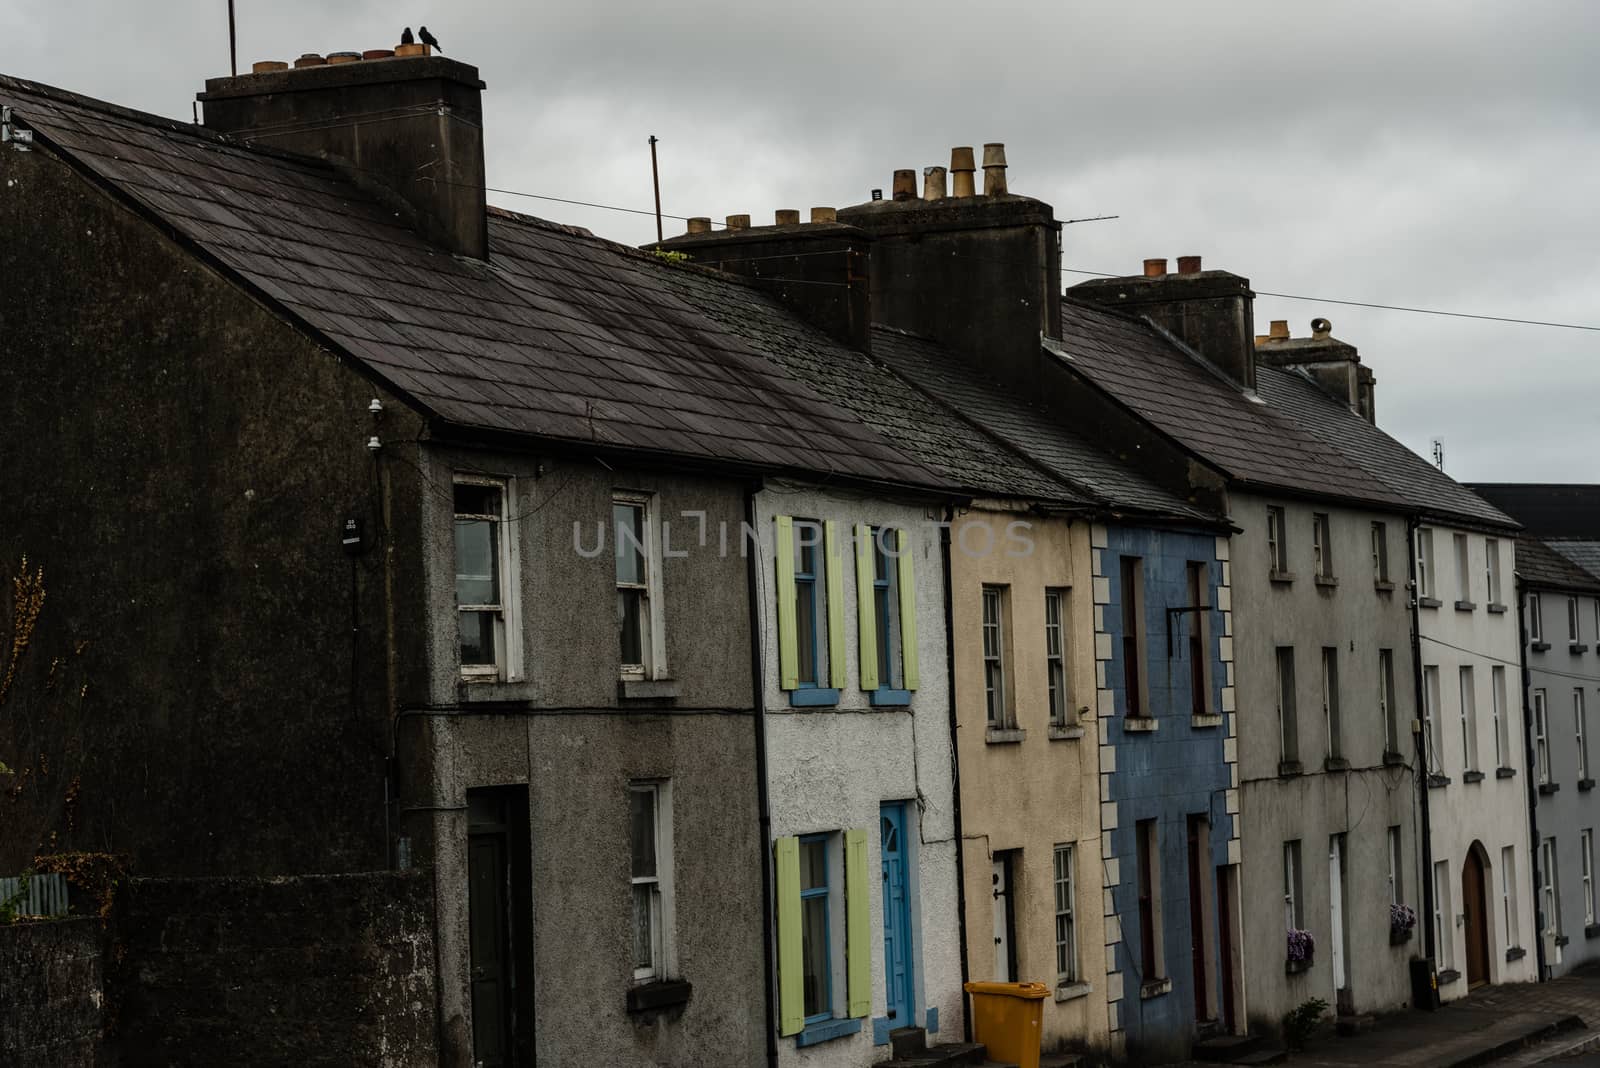 A multi-colored row of houses on a side street in Westport, Ireland.